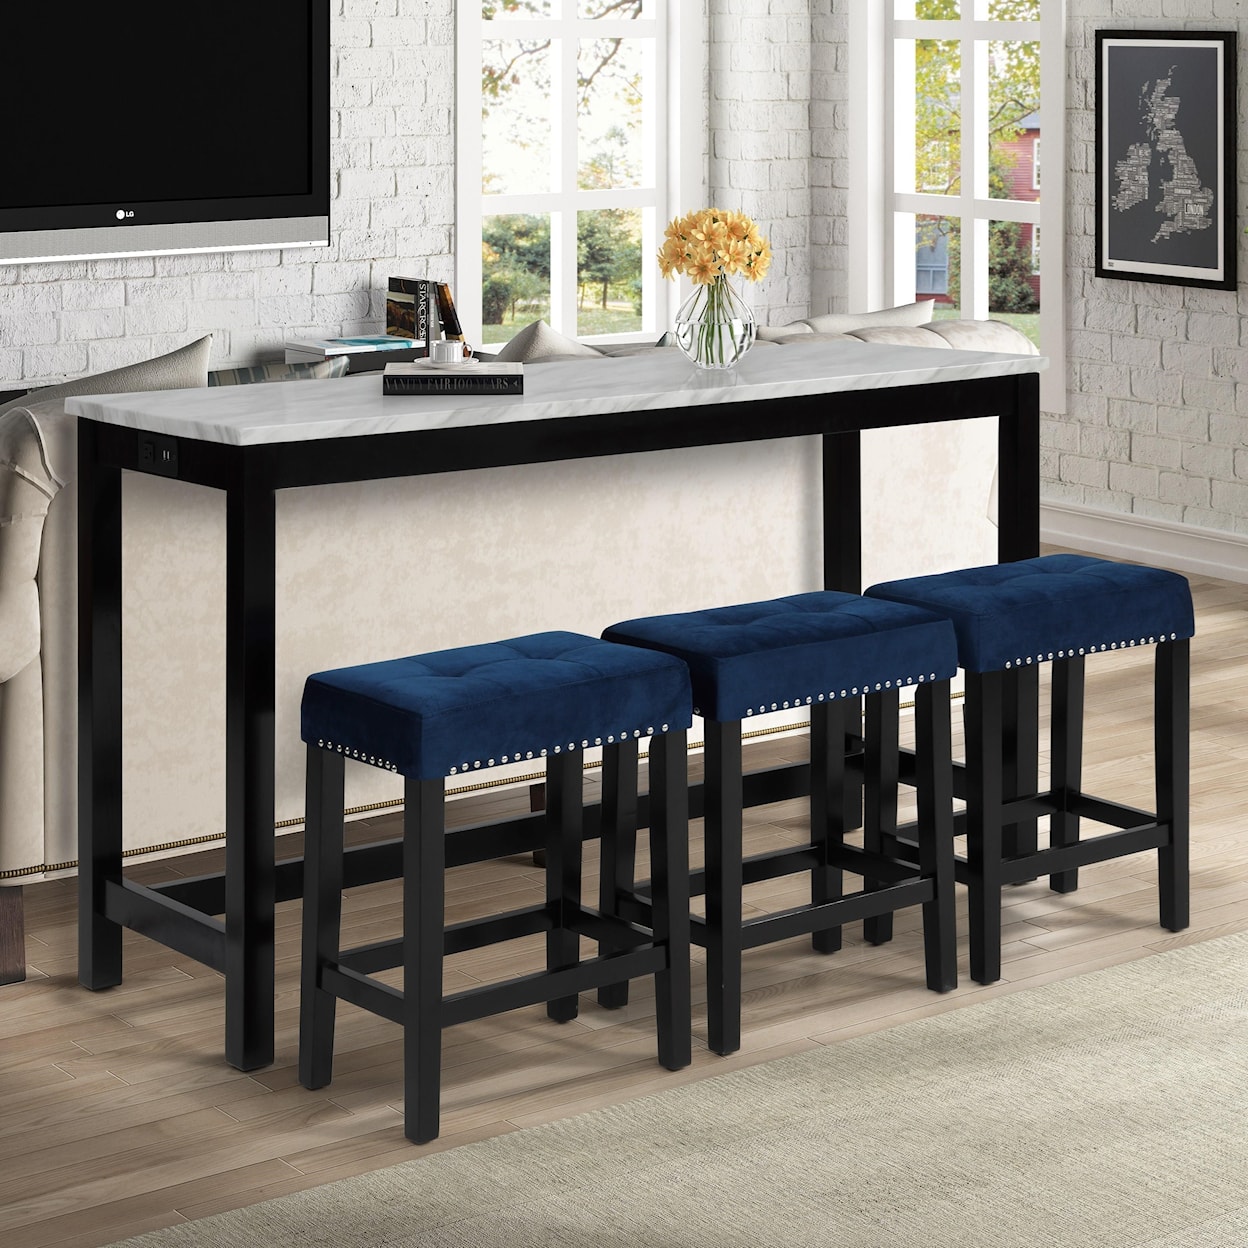 New Classic Furniture Celeste Theater Bar Table W/ 3 Stools